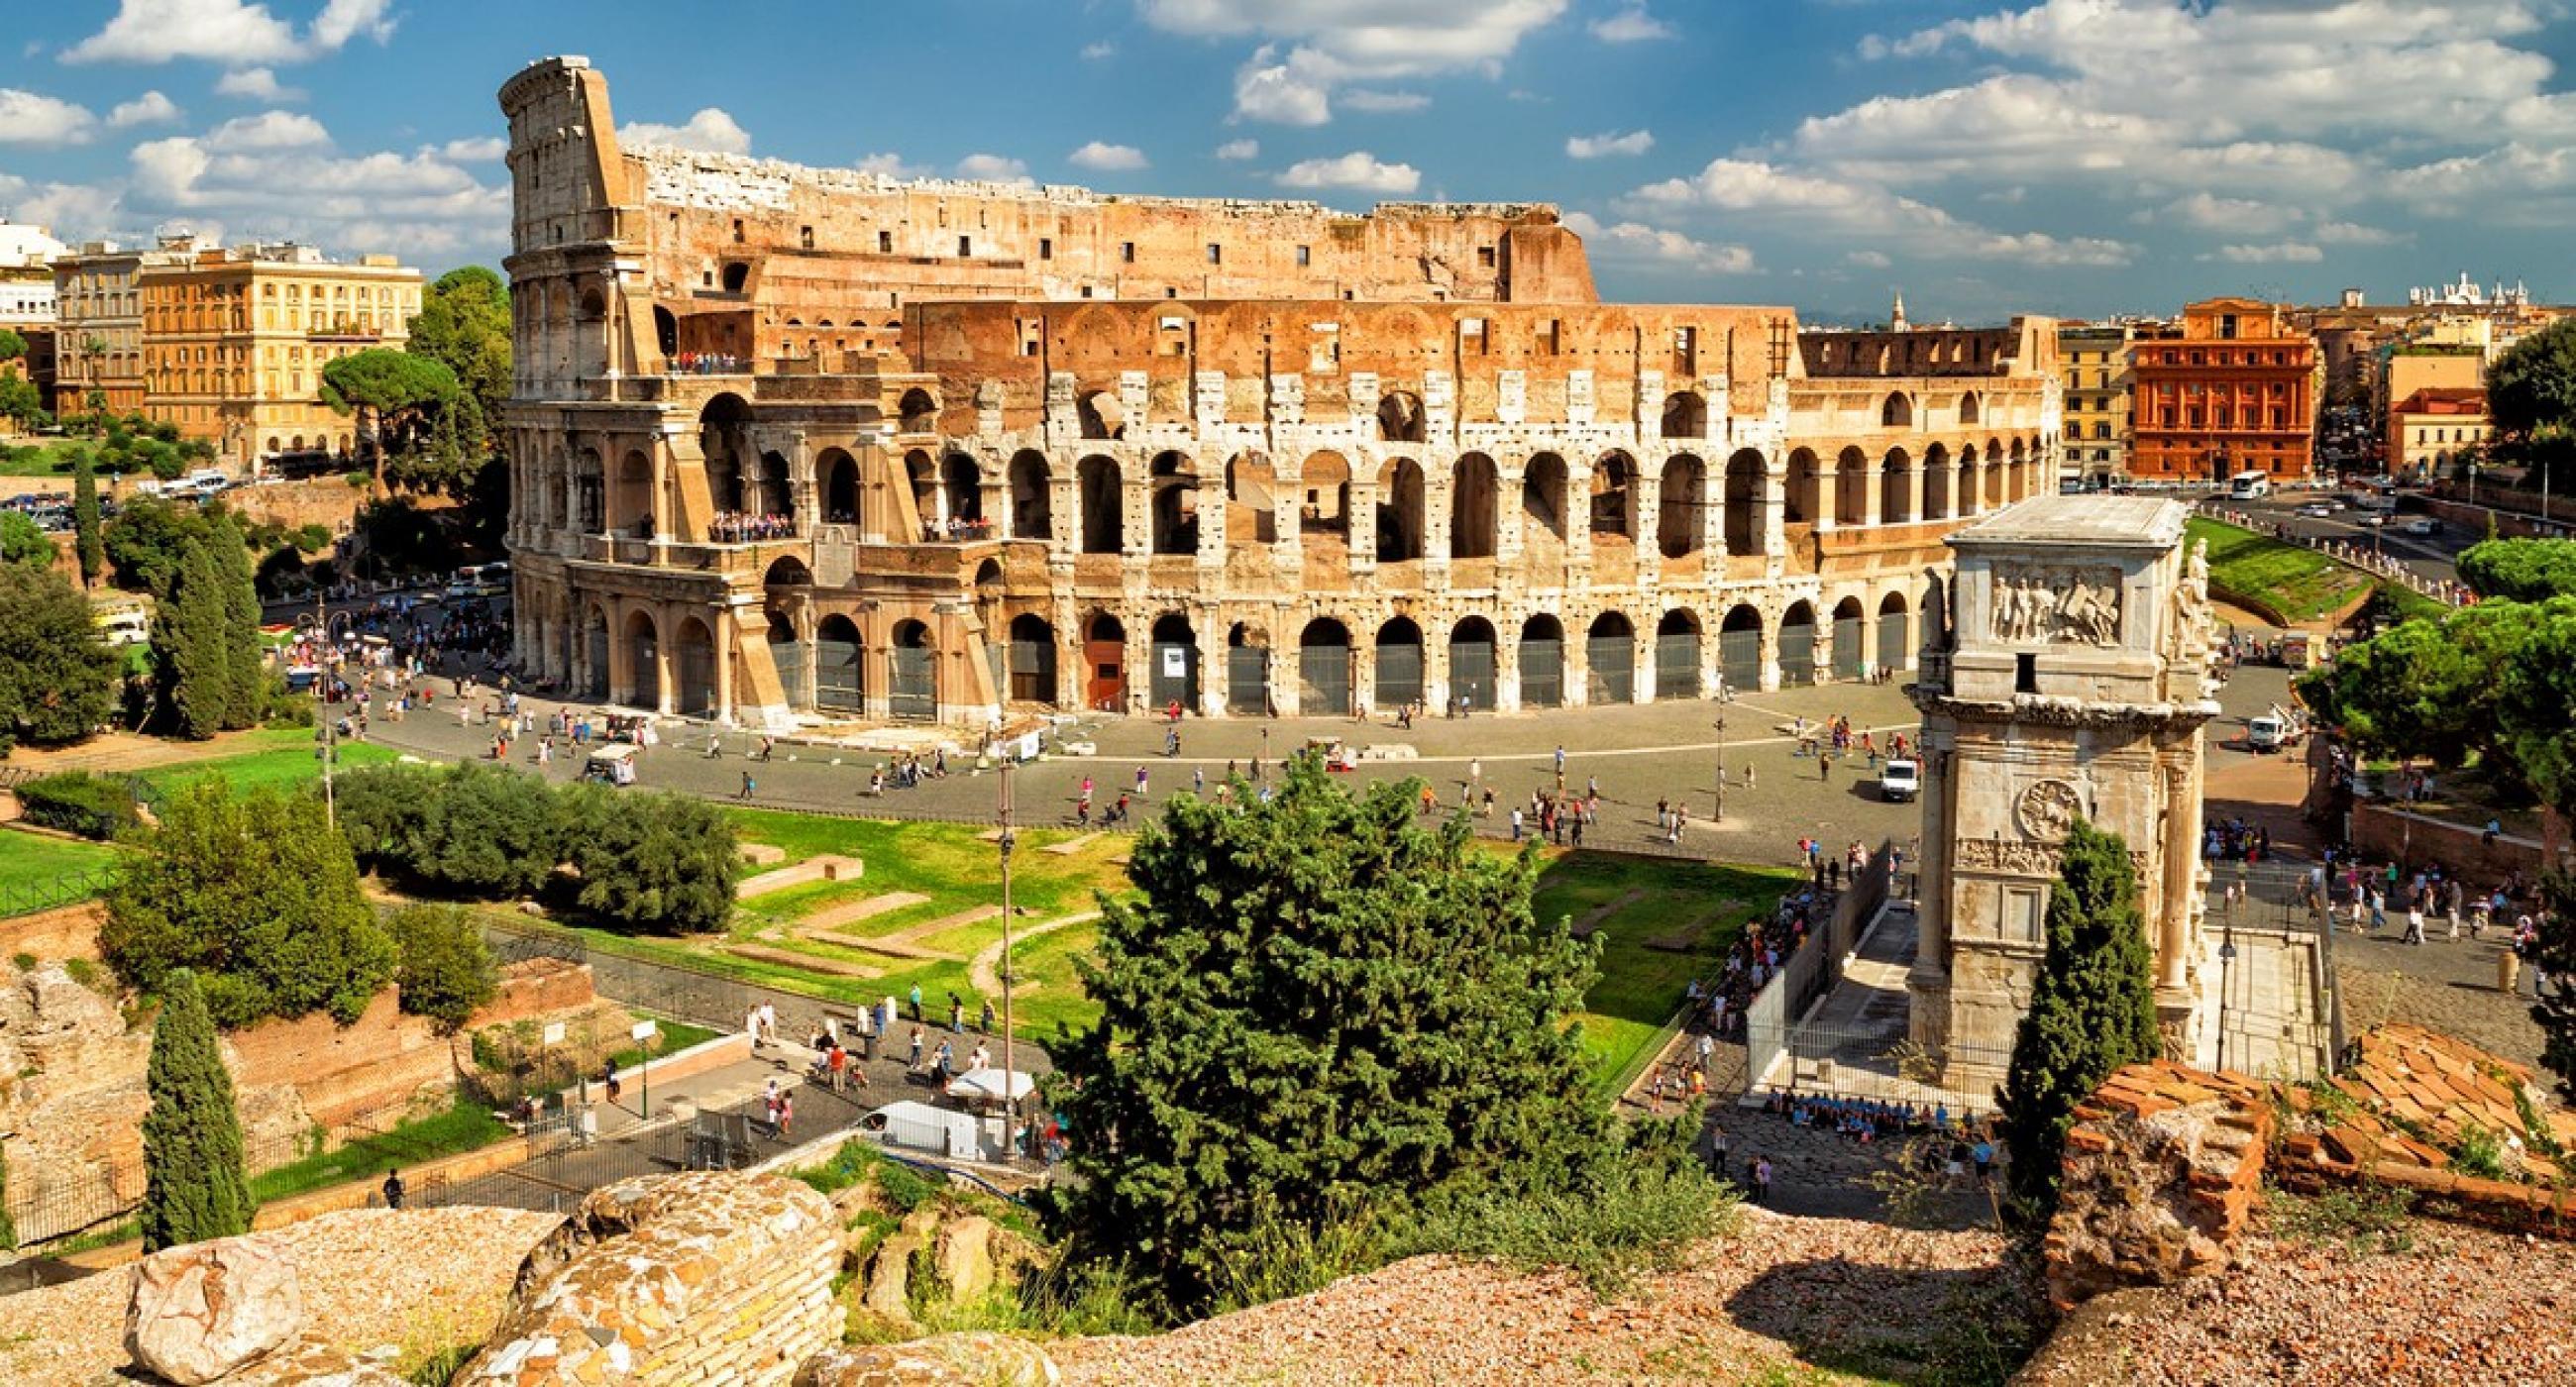 ></center></p><h2>Rome, the Eternal City</h2><p>Next departures:, description.</p><p>Discover the most iconic corners of Rome, the Eternal City, renowned all over the world: from Trastevere to Campo dei Fiori, from the Imperial Forums to Trinità dei Monti, to Navona  Square and the famous Trevi Fountain. Don’t miss a guided tour of the Vatican Museums and the Sistine Chapel. </p><h2>Tour programme</h2><p>Arrival in Rome, meeting with the tour leader and the rest of the group. Dinner at the hotel </p><h2>ANCIENT ROME</h2><p>Hotel breakfast. This morning is dedicated to the visit of ancient Rome and its treasures. The splendor of the past is evidenced by many monuments like Colosseum (outside), commissioned around A.D. 70-72 originally built for the fighting and gladiatorial games. Proceed to the Arch of Constantine, built in A.D. 315 in honor of Constantine I’s victory over Maxentius at Pons Milvius, the Roman Forum, and the area of the Imperial Forums, Capitoline Hill and “Il Vittoriano” (aka the Altare della Patria; Altar of the Fatherland). We will also see the church of San Pietro in Vincoli with Michelangelo’s statue of Moses. Lunch at your leisure. In the afternoon, we'll have a guided stroll in the centre, discovering the several squares and fountains od Rome, such as Piazza di Spagna, Piazza Navona and the marvellous Fontana di Trevi.  Dinner in a typical trattoria, overnight. </p><h2>VATICAN CITY AND CLASSIC ROME</h2><p>Breakfast at the hotel. Meeting with the guide for a tour of 